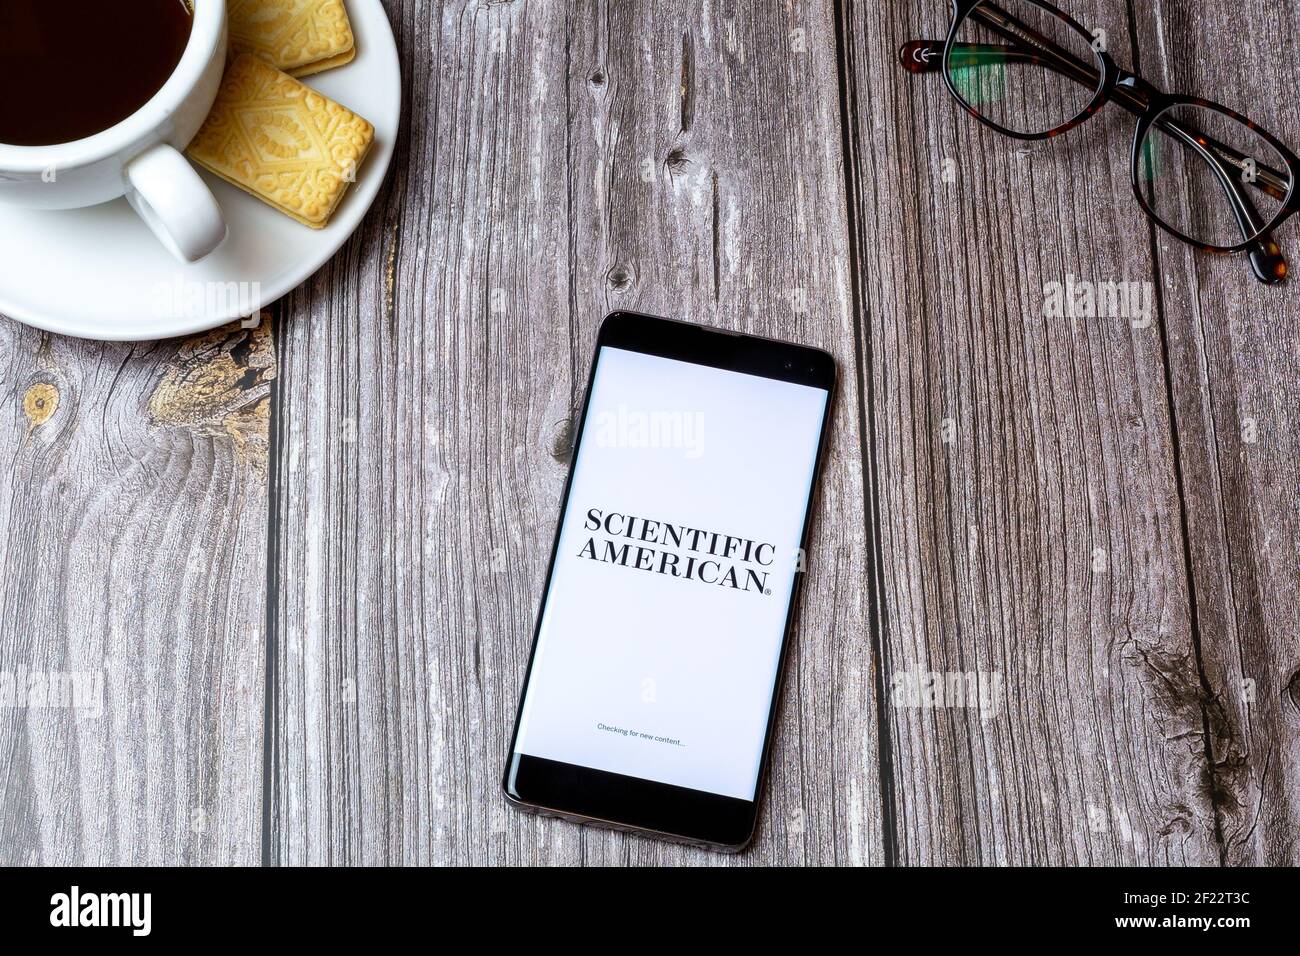 A mobile phone or cell phone on a wooden table with the Scientific American app open next to a coffee and glasses Stock Photo